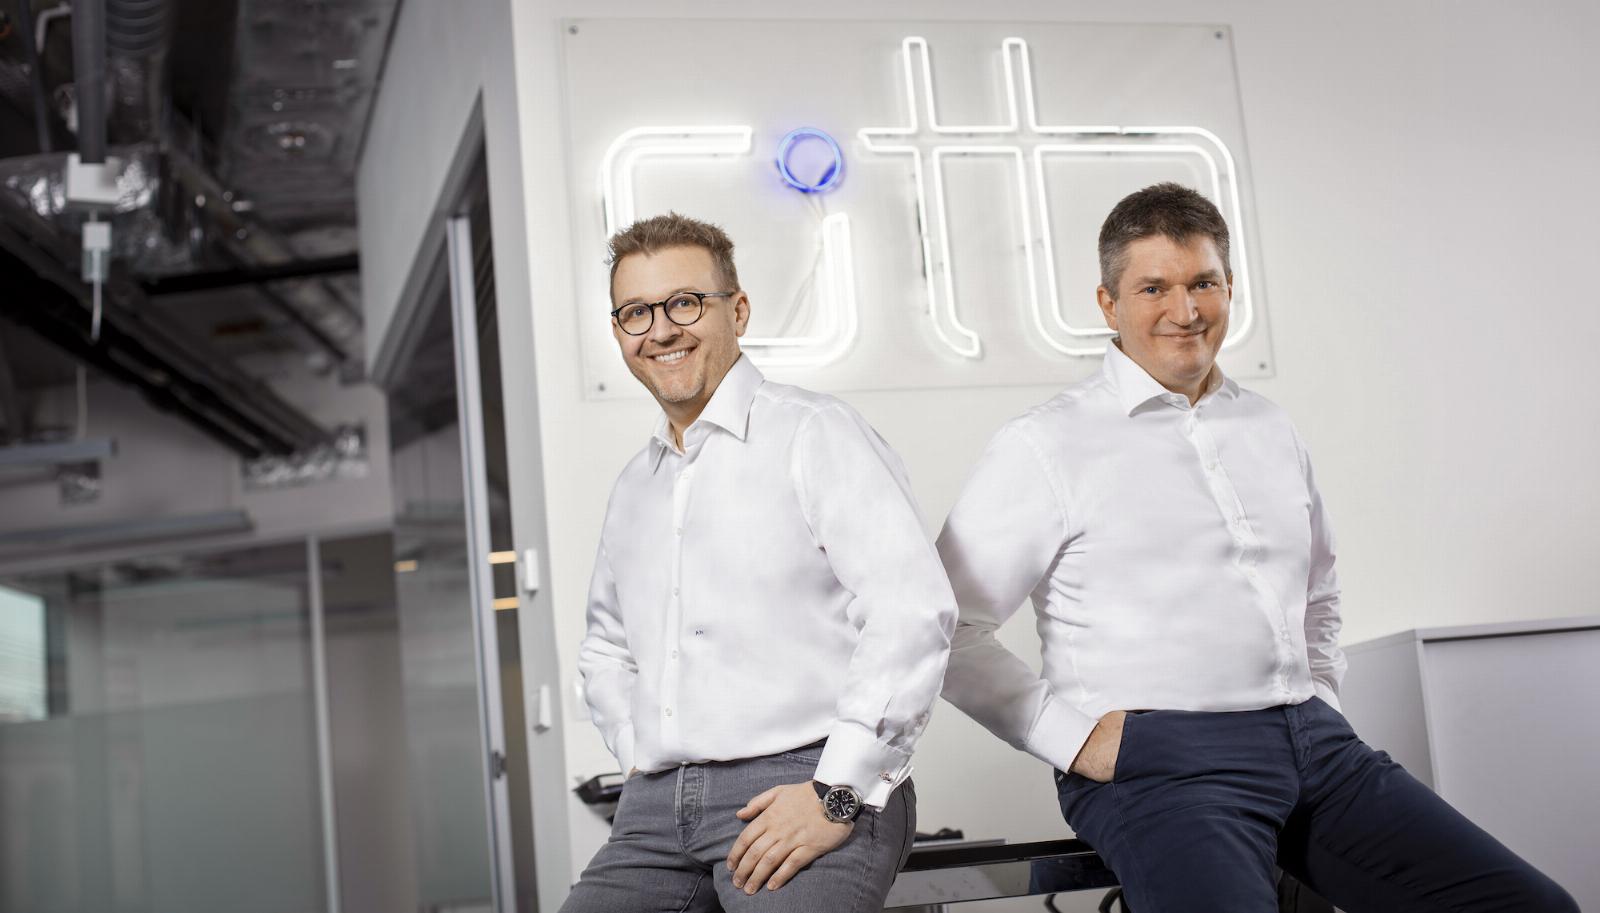 With backing from NATO Innovation Fund, OTB Ventures will invest $185M into European deep tech